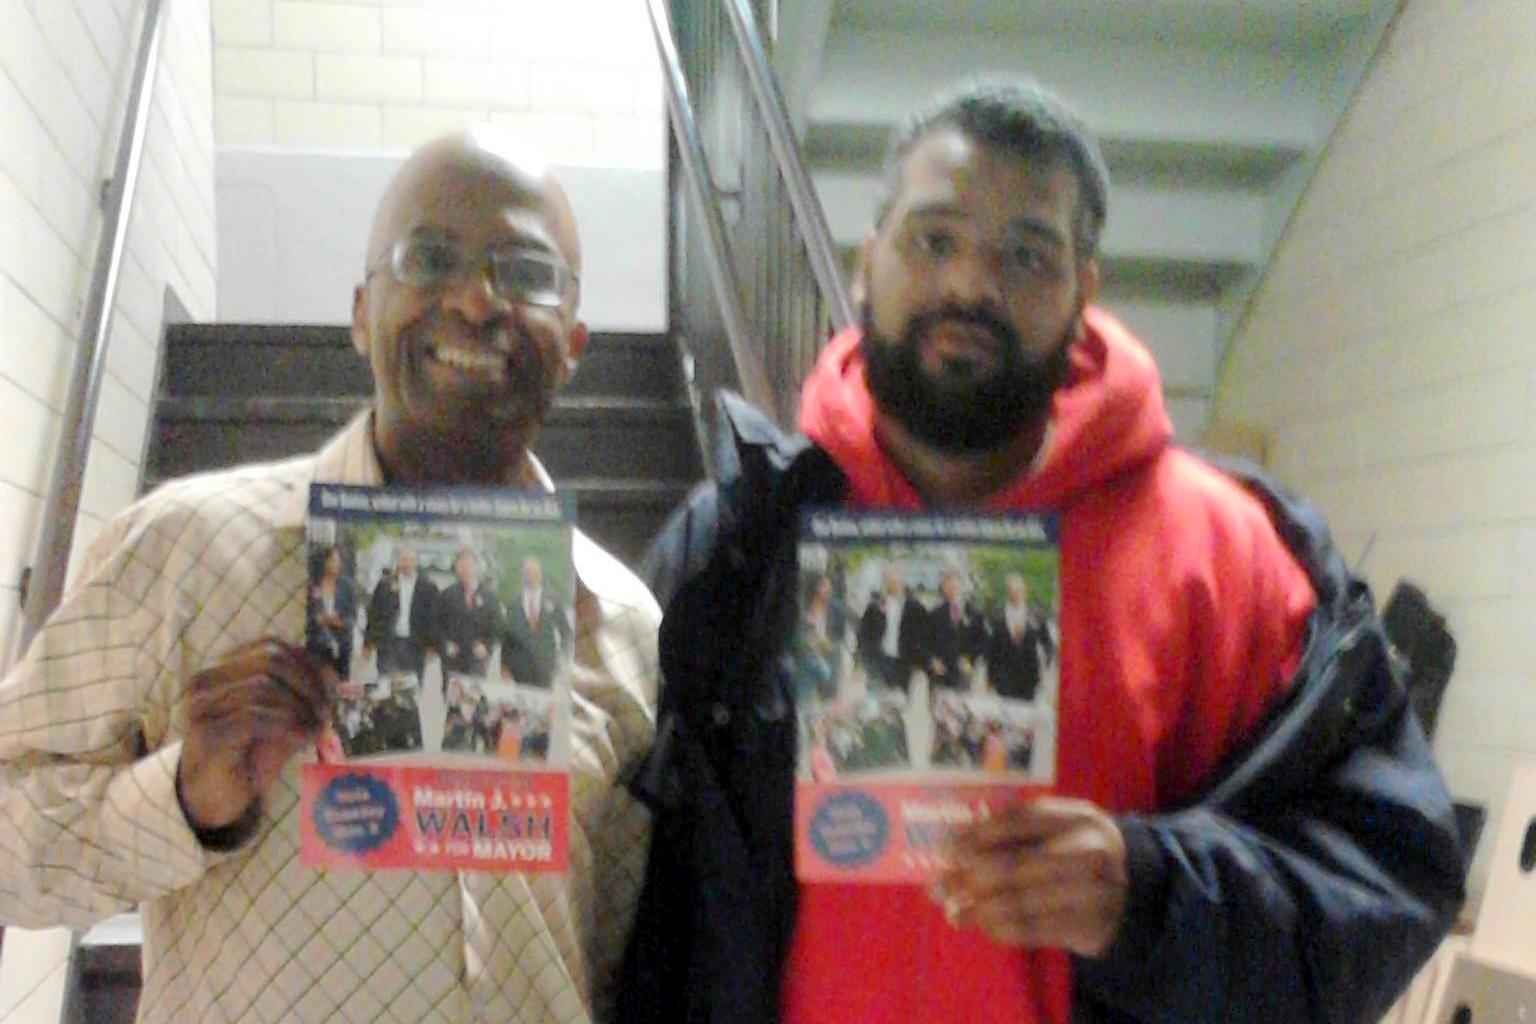 Anthony Meeks and Martin Andino both BCYF street workers campaigning for Walsh